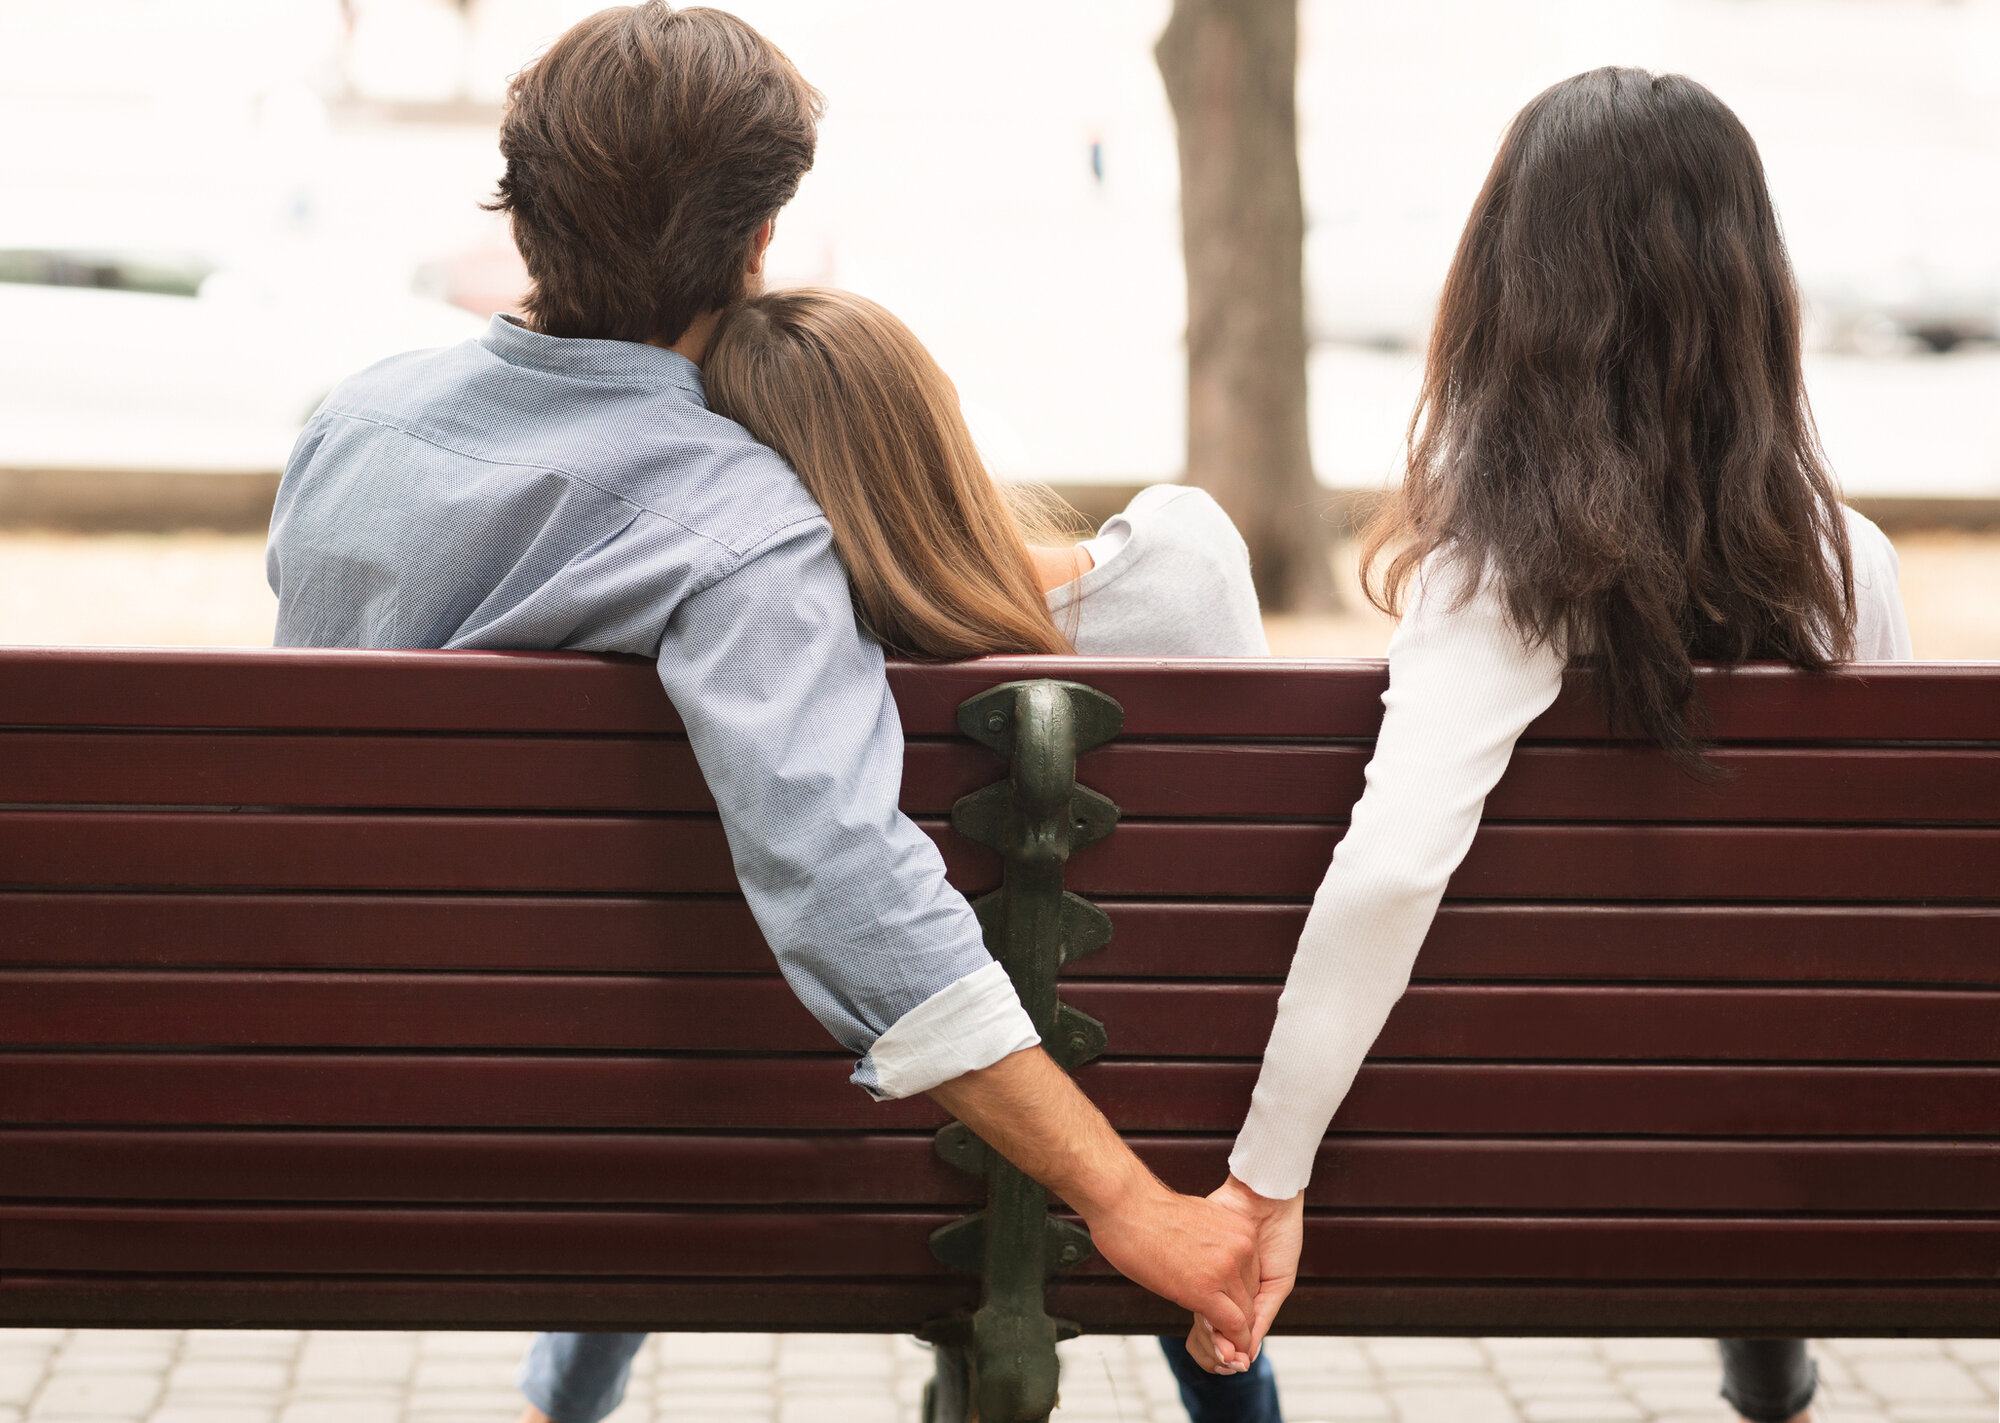 Husband Holding Hands With Girlfriend's Friend Sitting On Bench Outdoor